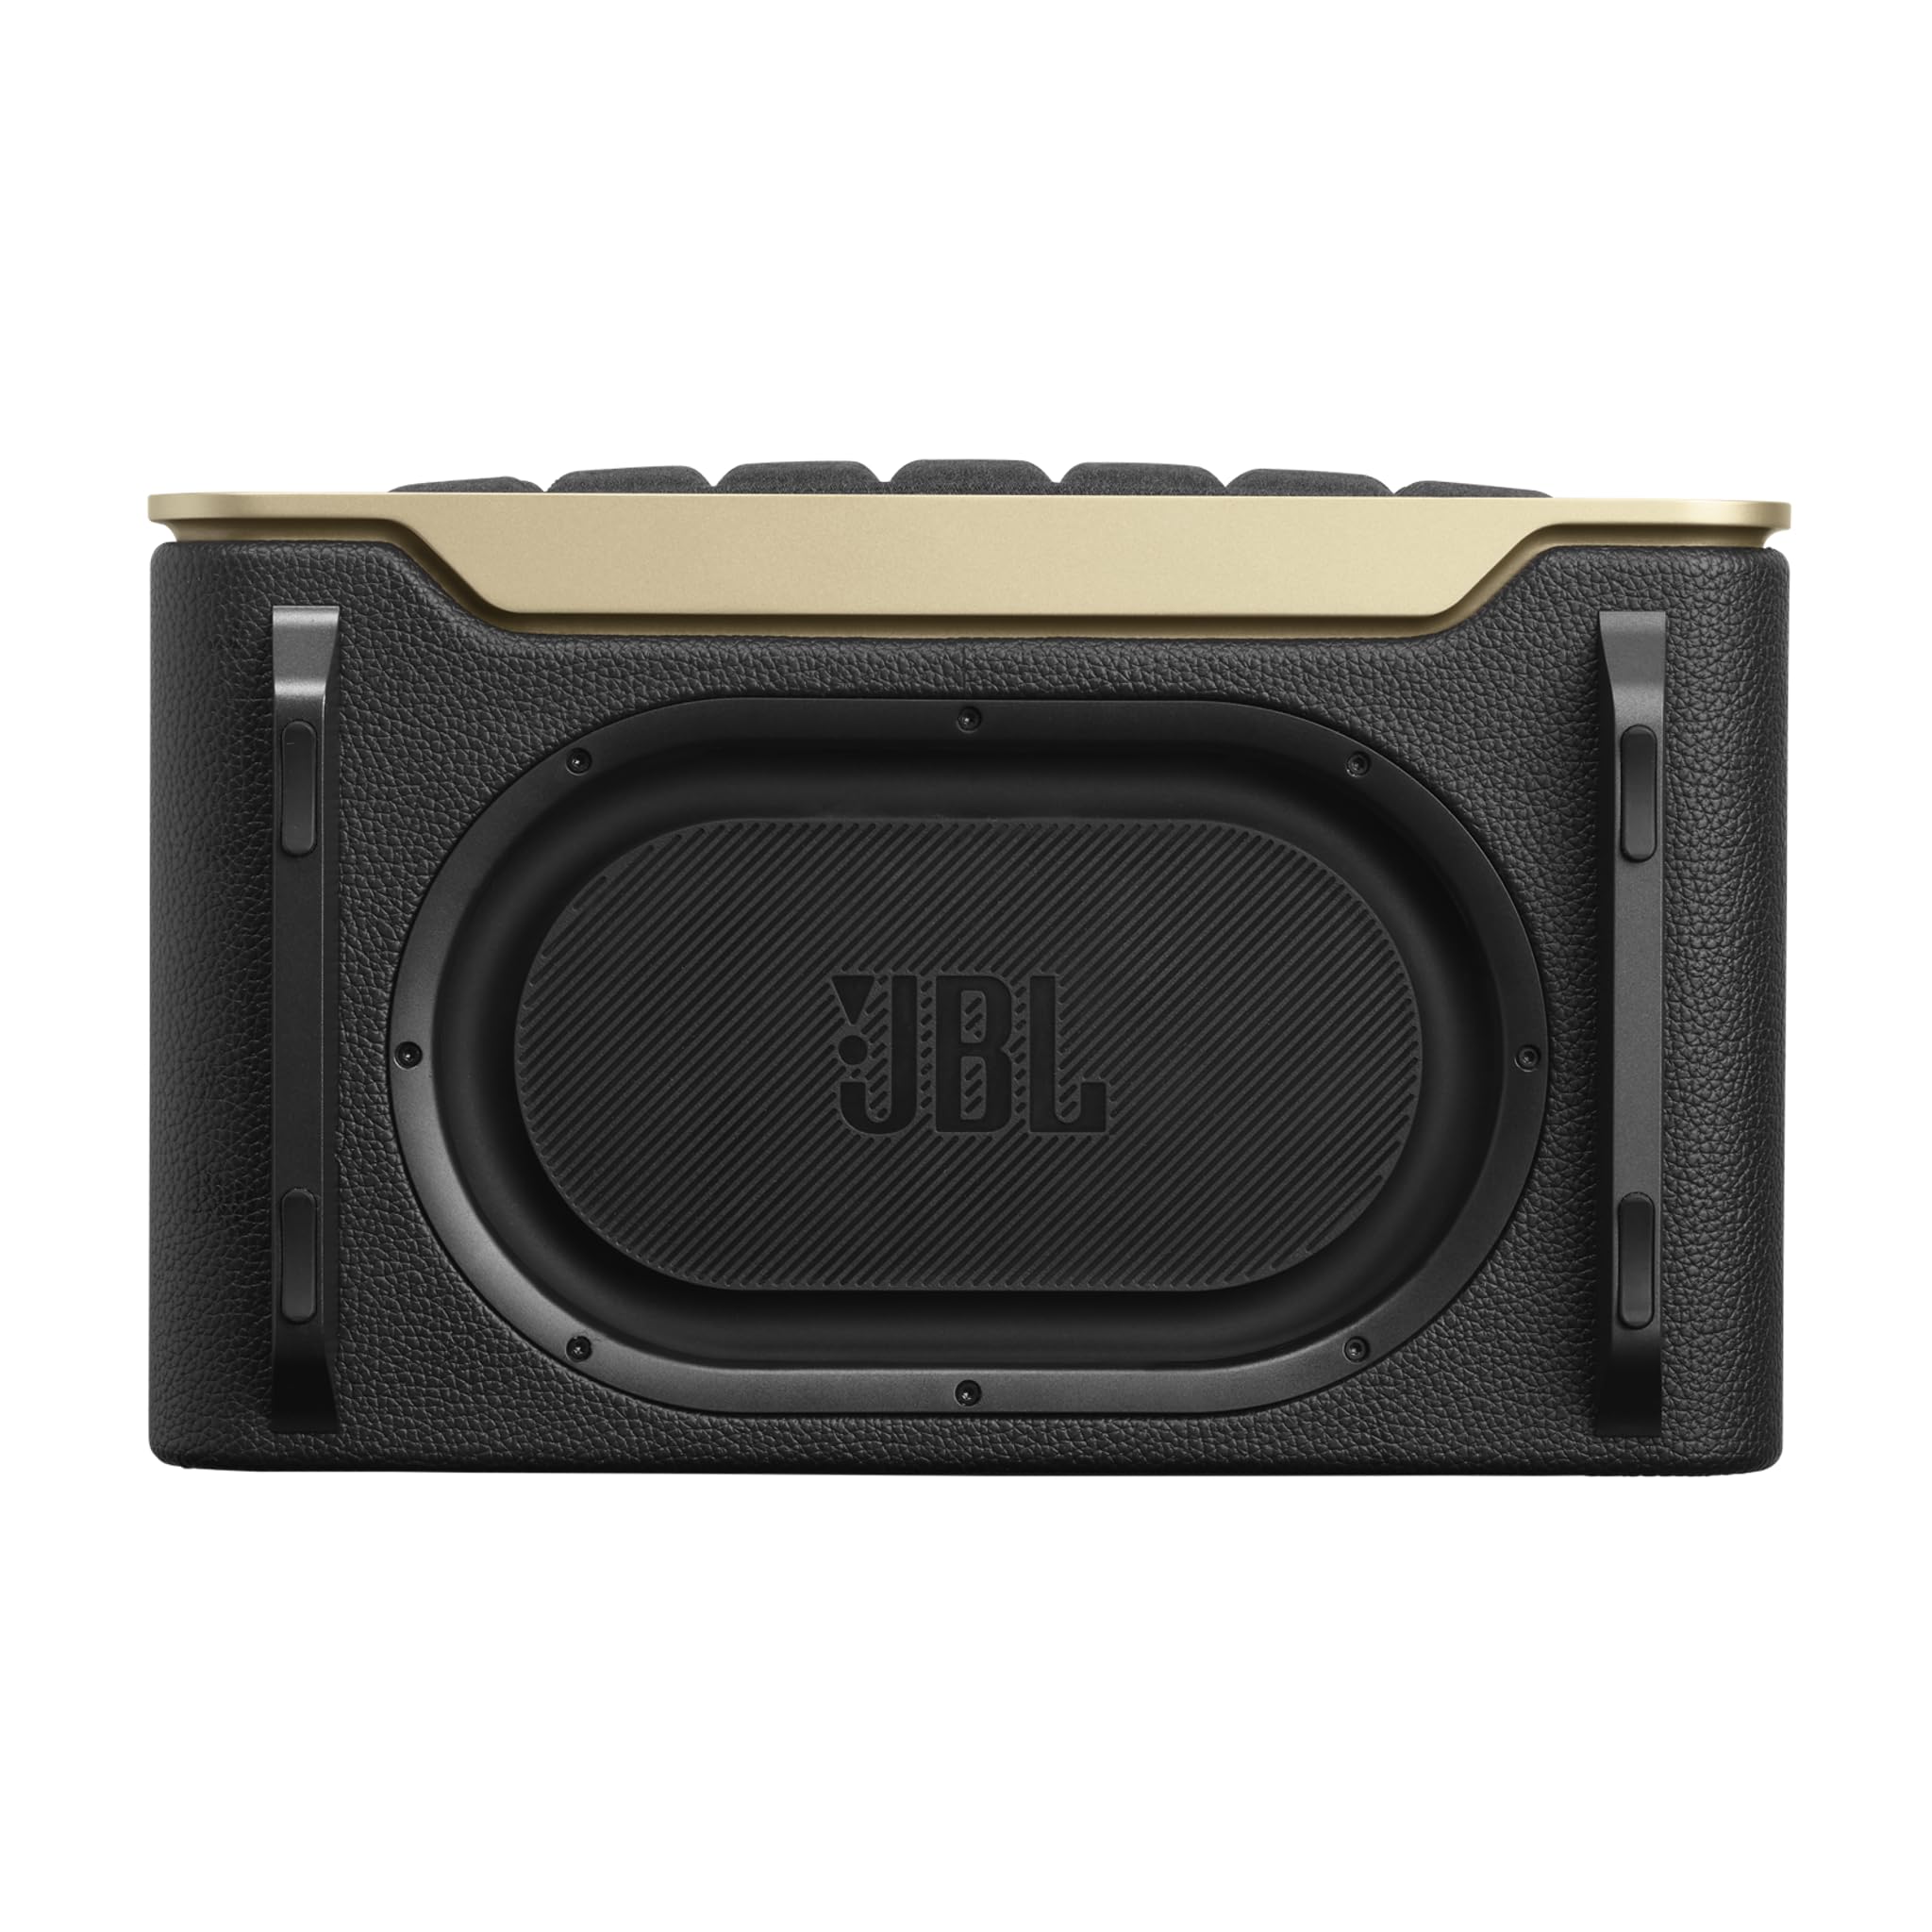 JBL Authentics 200 - Wireless Home Speaker, Built in Wi-Fi, Bluetooth and Voice Assistants, Built in Alexa and Google Assistant